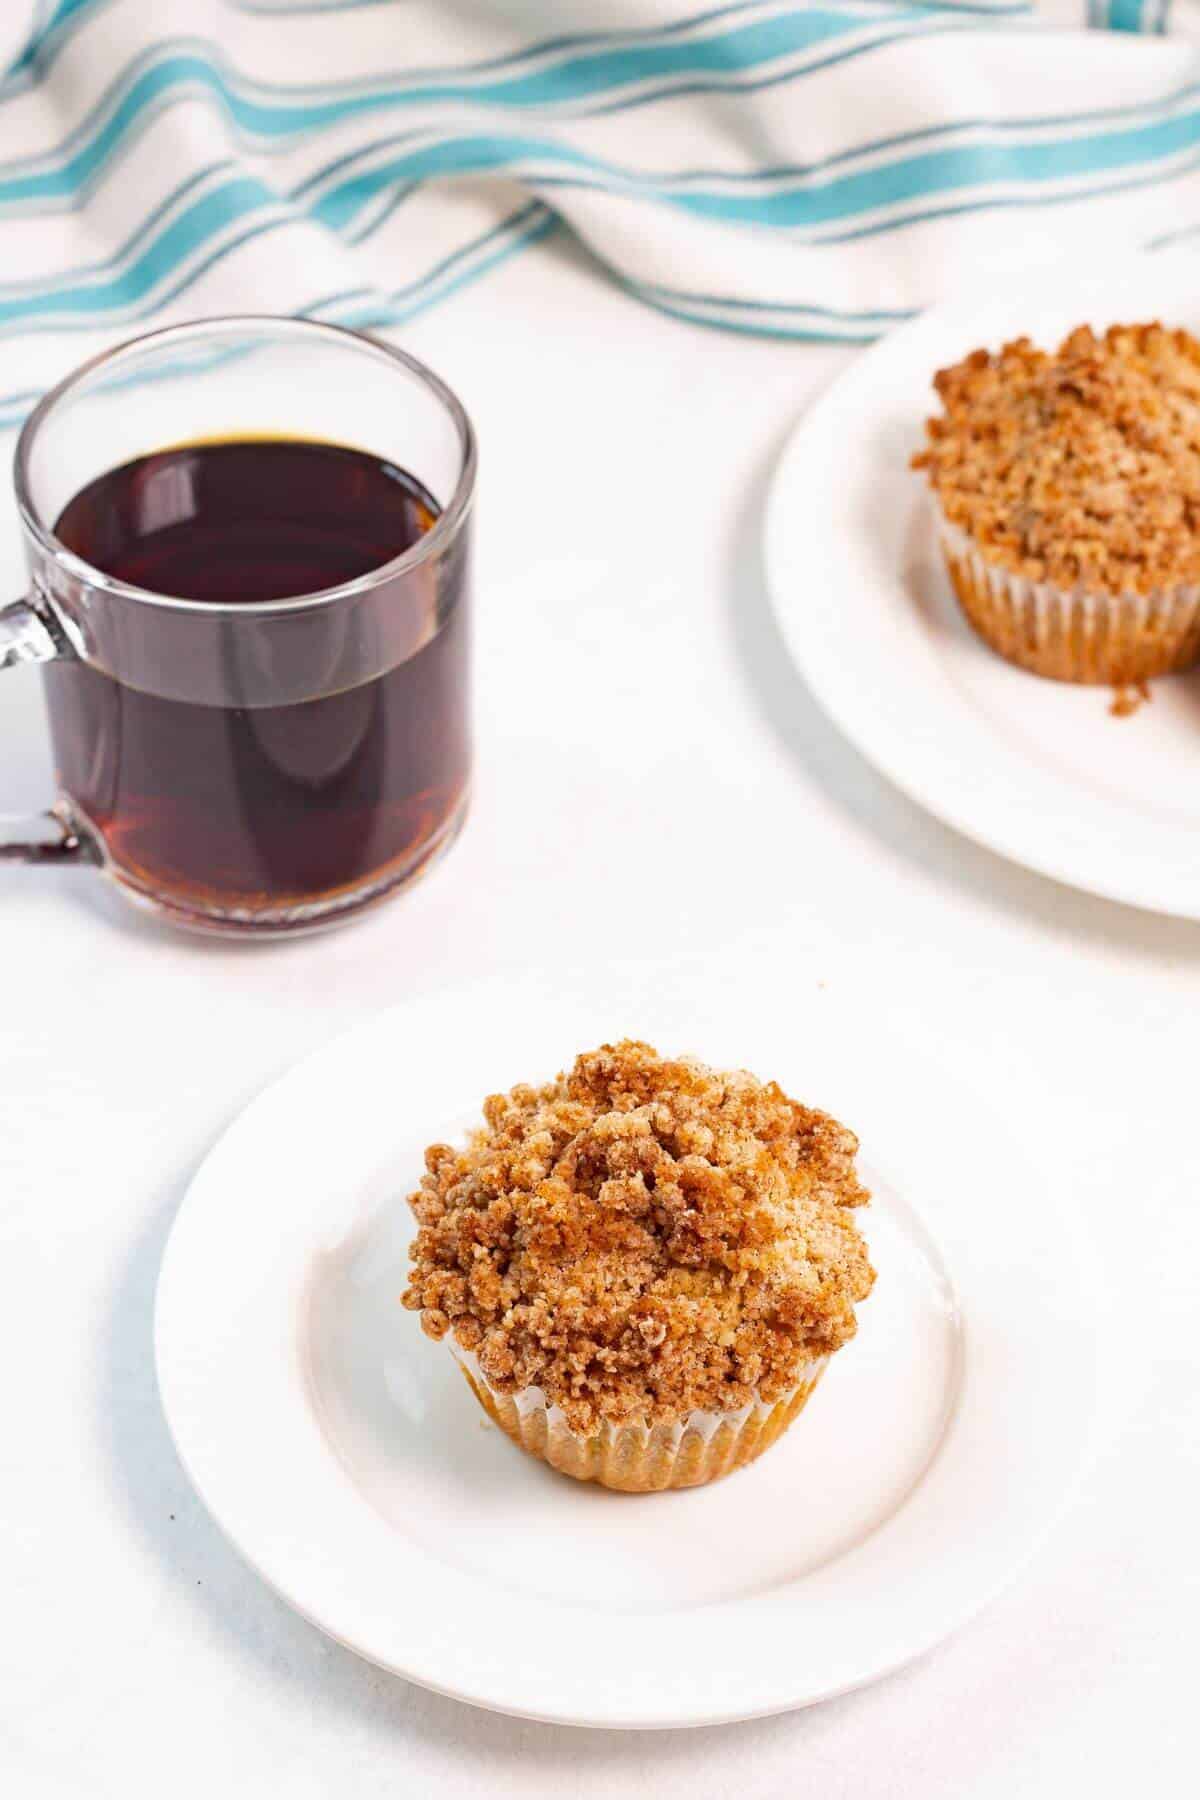 Cinnamon coffee cake muffins on white plates with coffee.